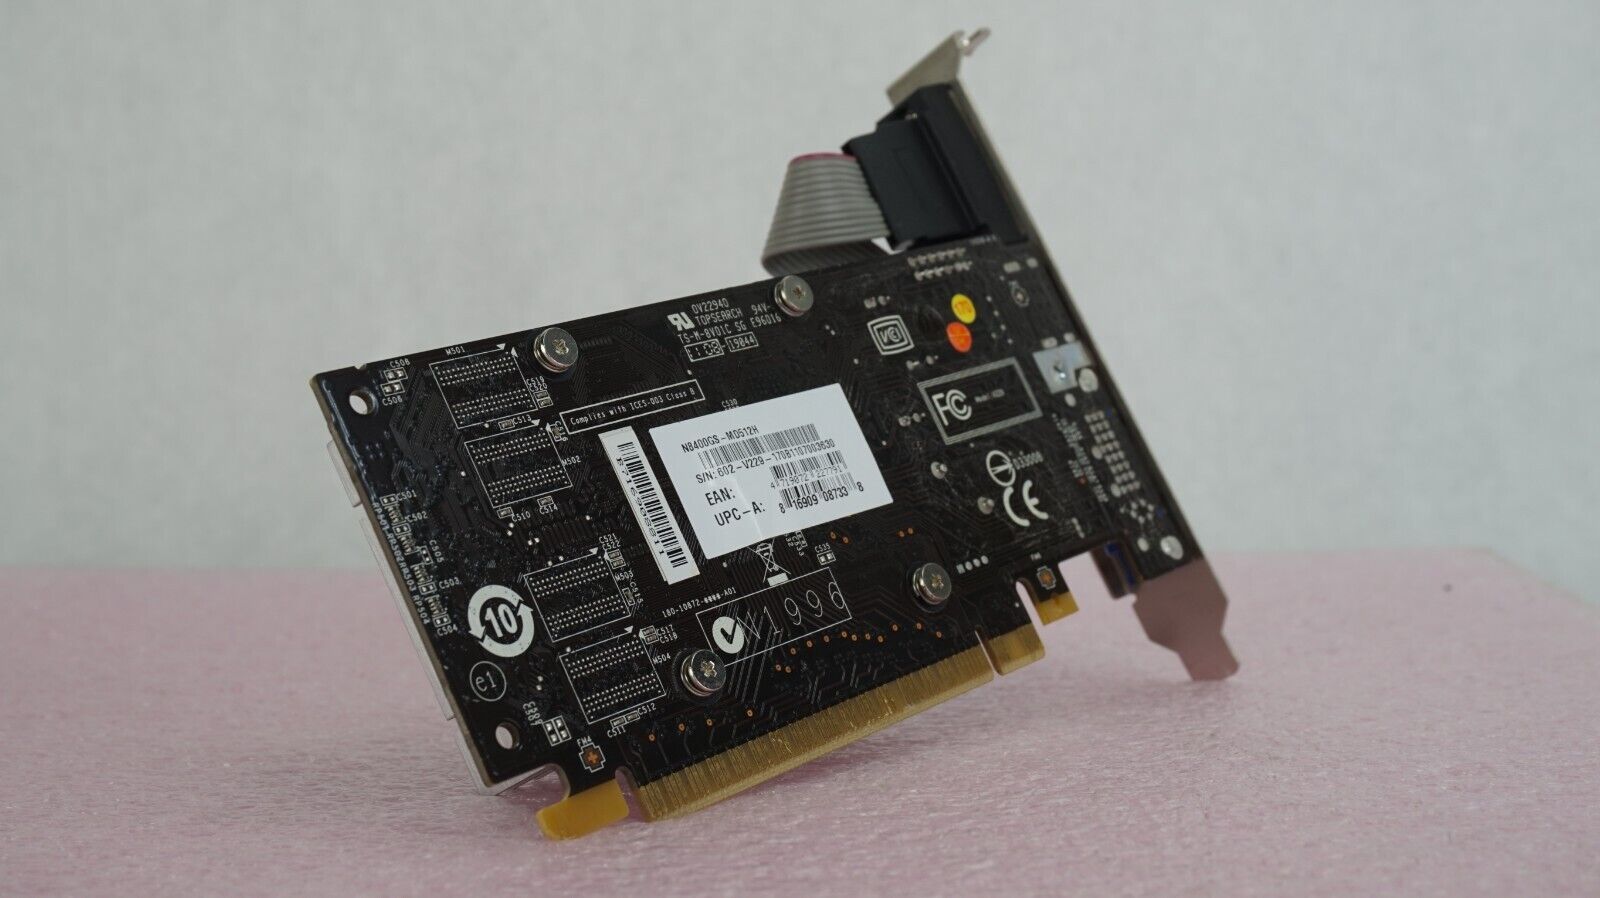 MSI GeForce 8400GS 512MB PCI-e Silent Graphics Card